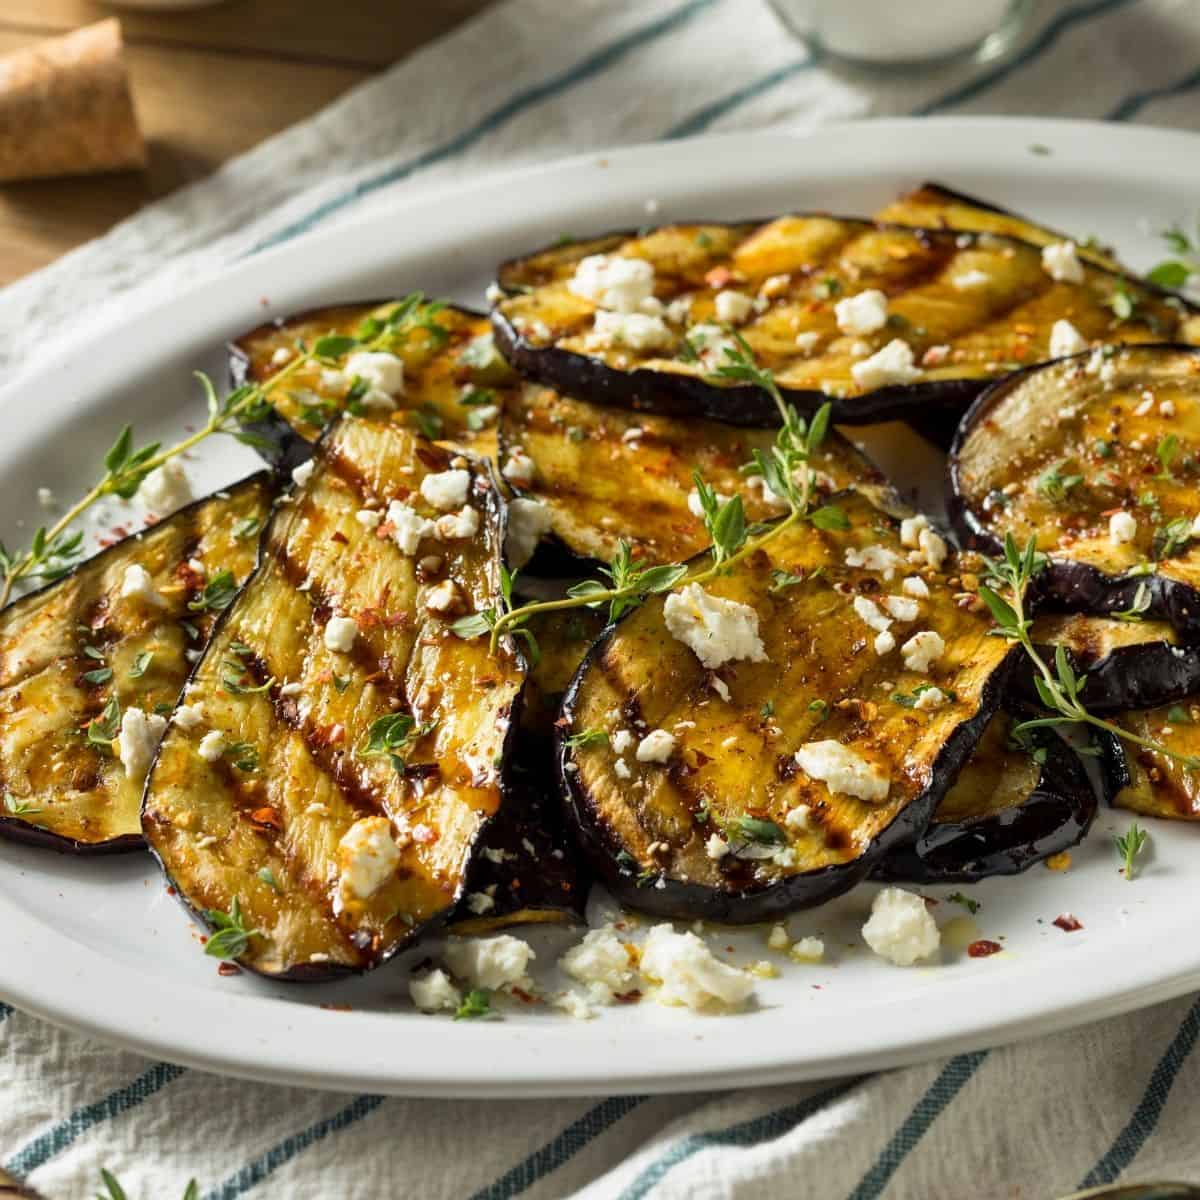 Grilled eggplant slices topped with feta cheese on a white plate on a white and green striped placemat